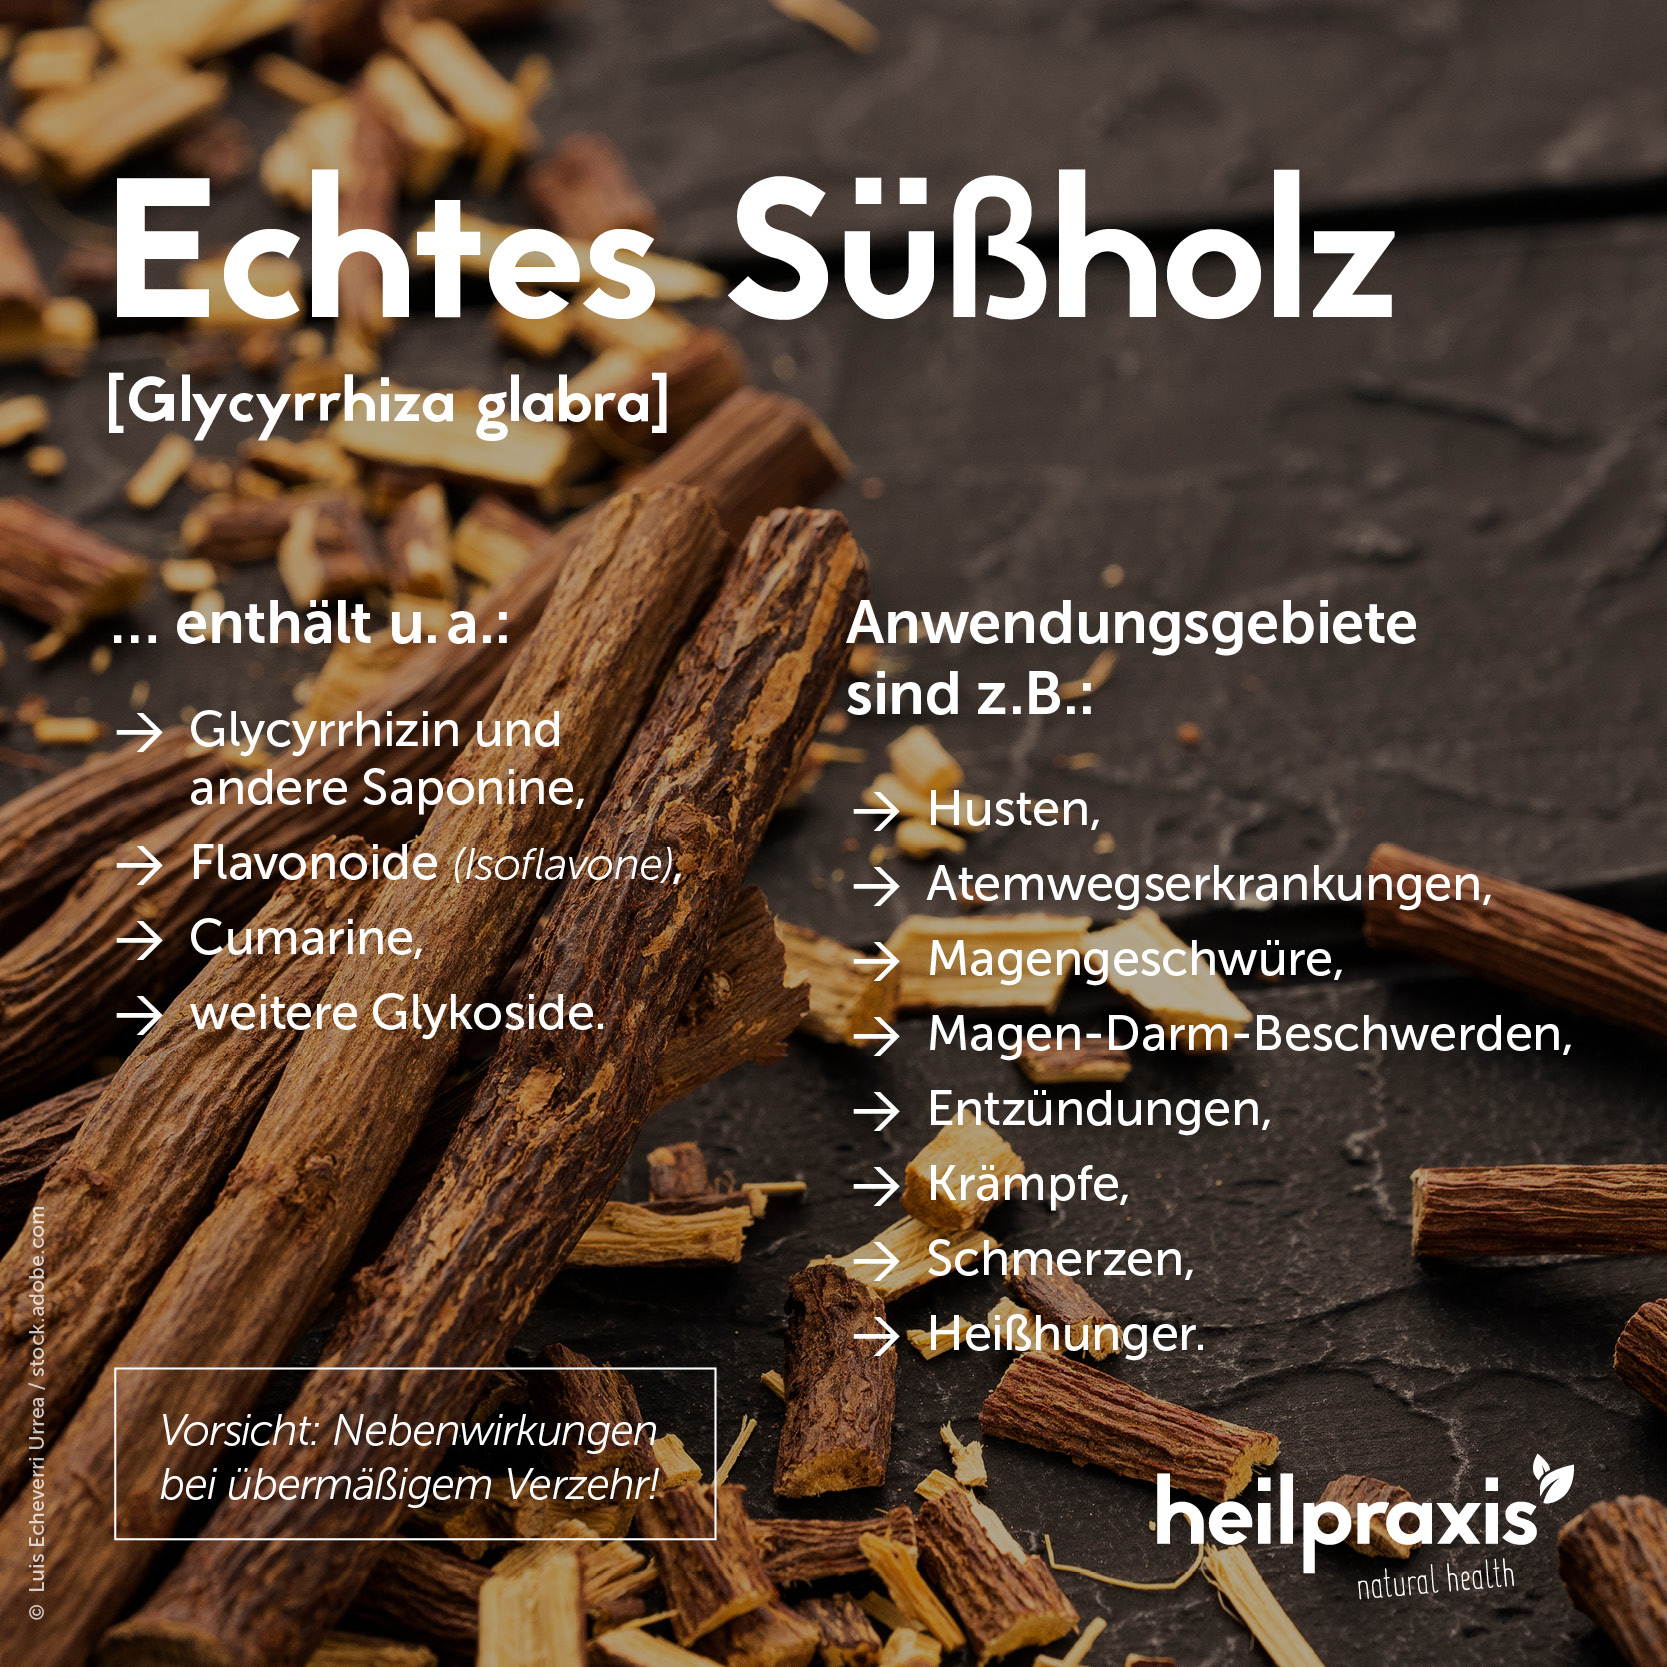 Overview graphic of the ingredients and application of licorice